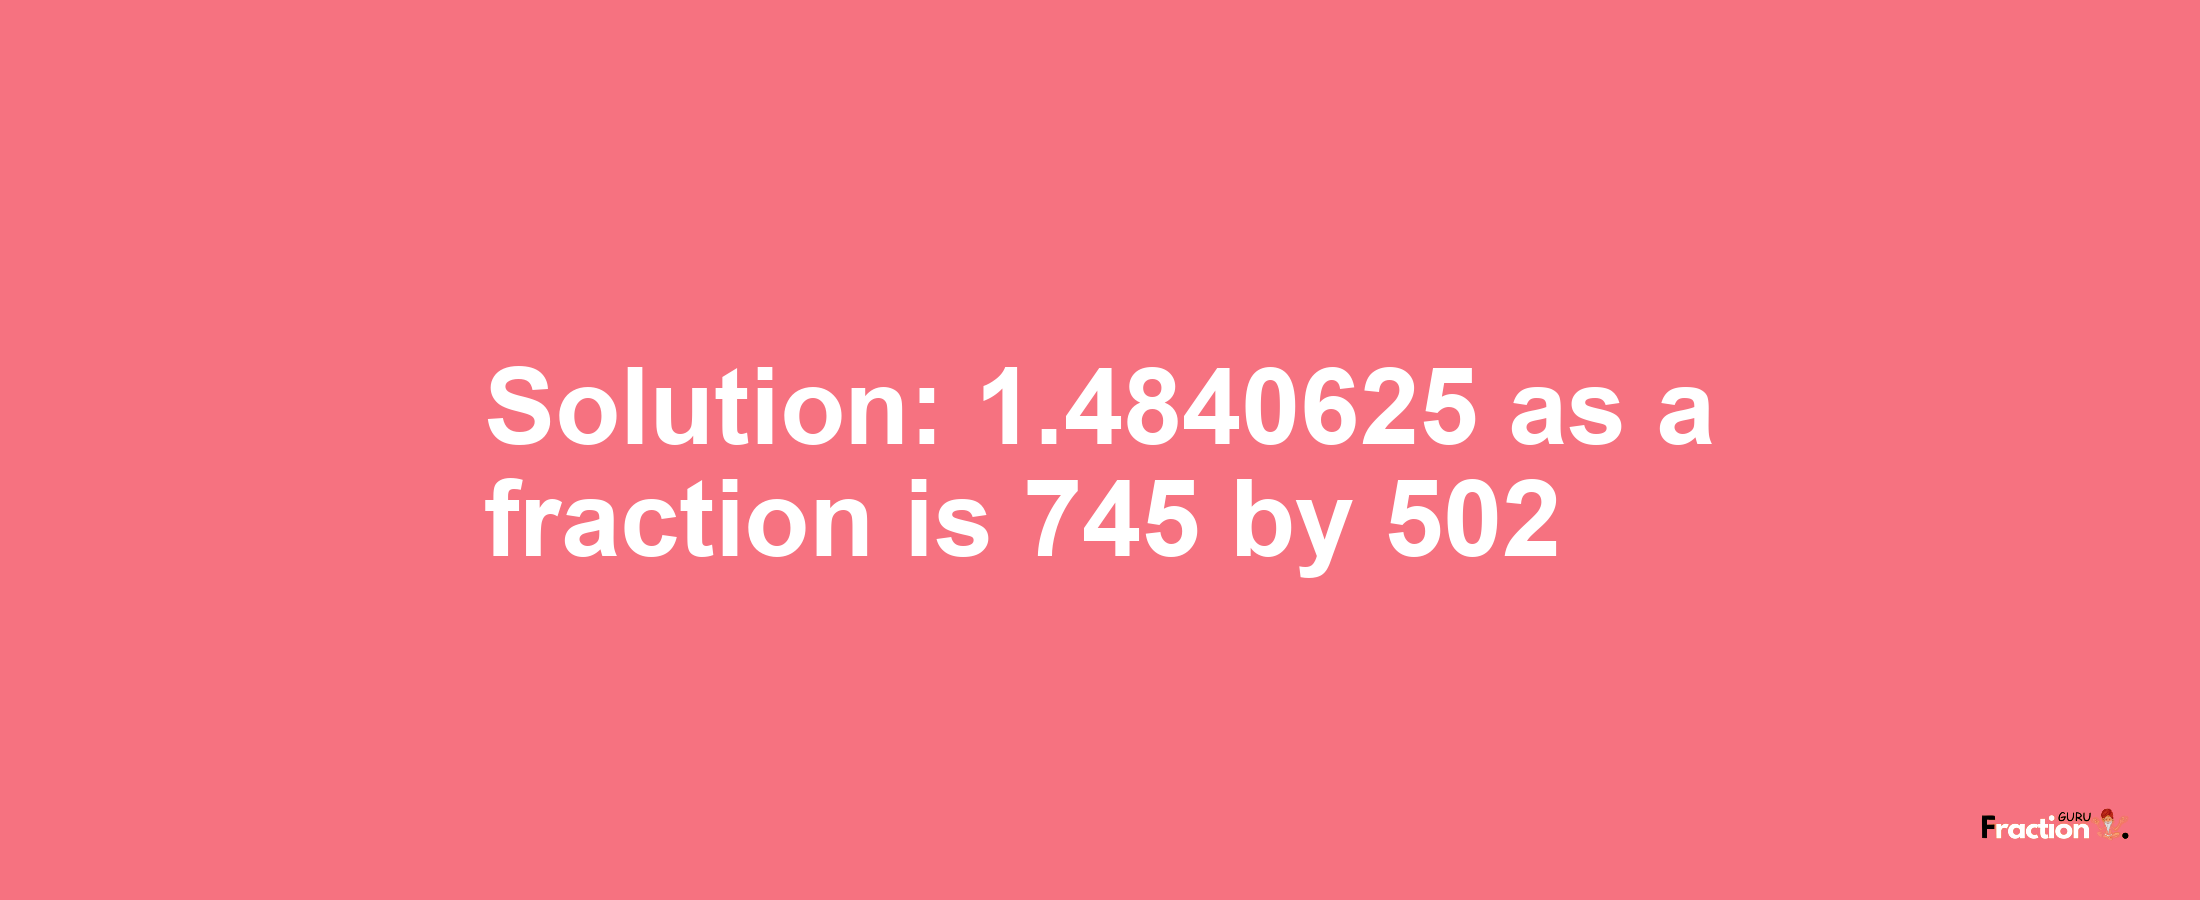 Solution:1.4840625 as a fraction is 745/502